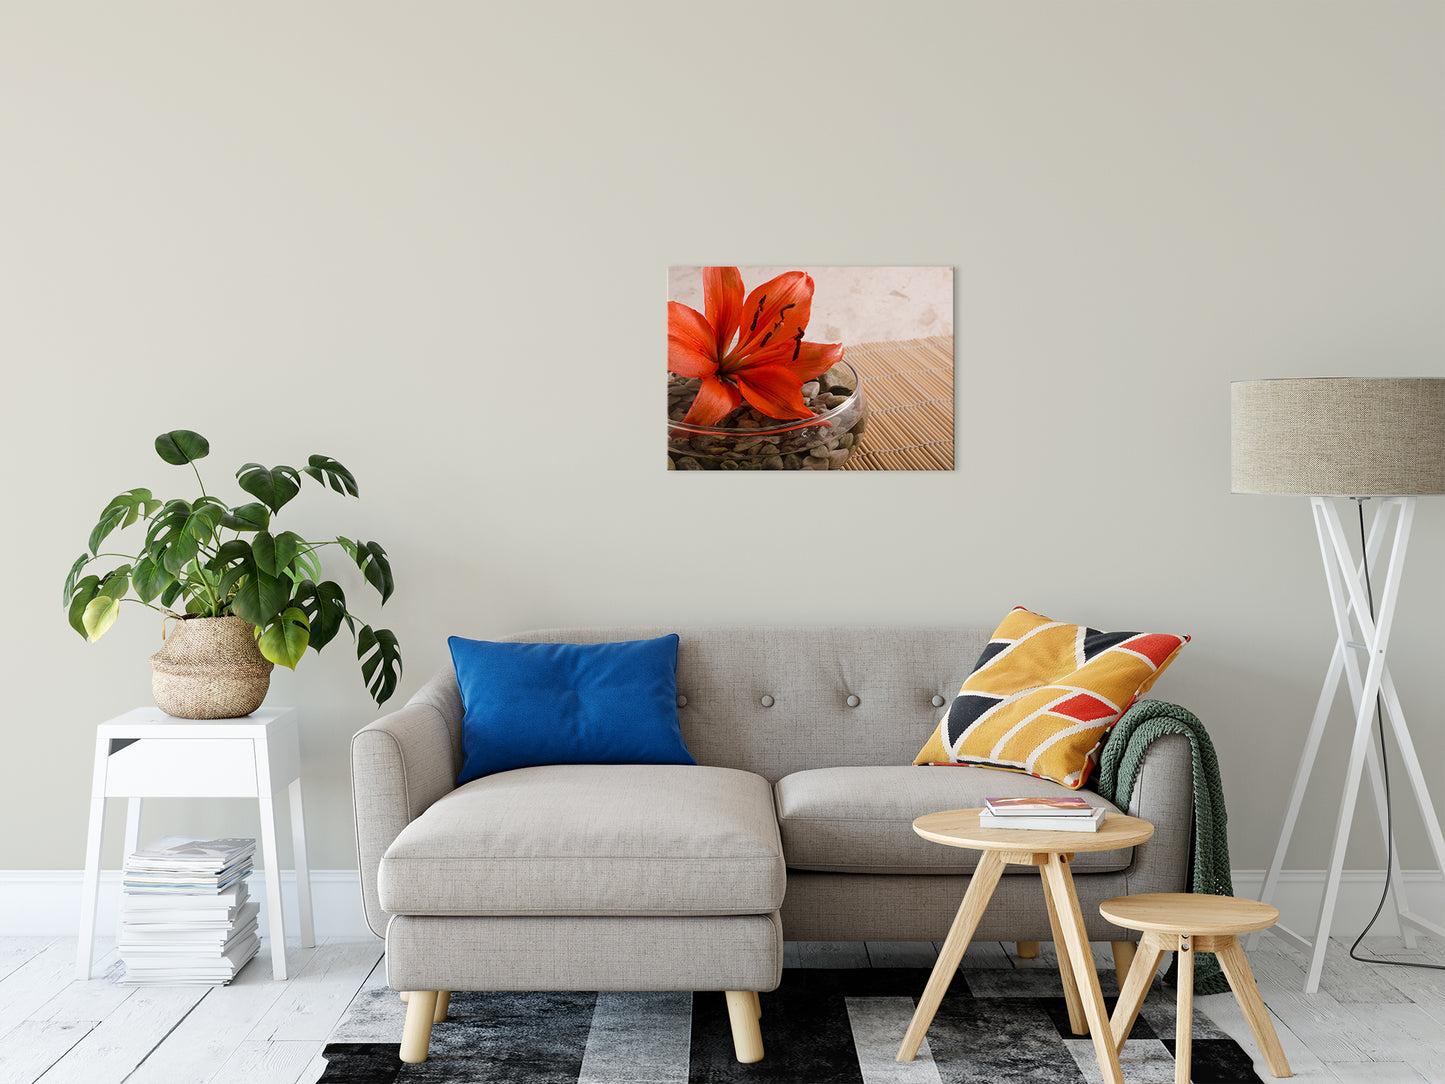 Tranquil Lily Nature / Floral Photo Fine Art Canvas Wall Art Prints 20" x 30" - PIPAFINEART